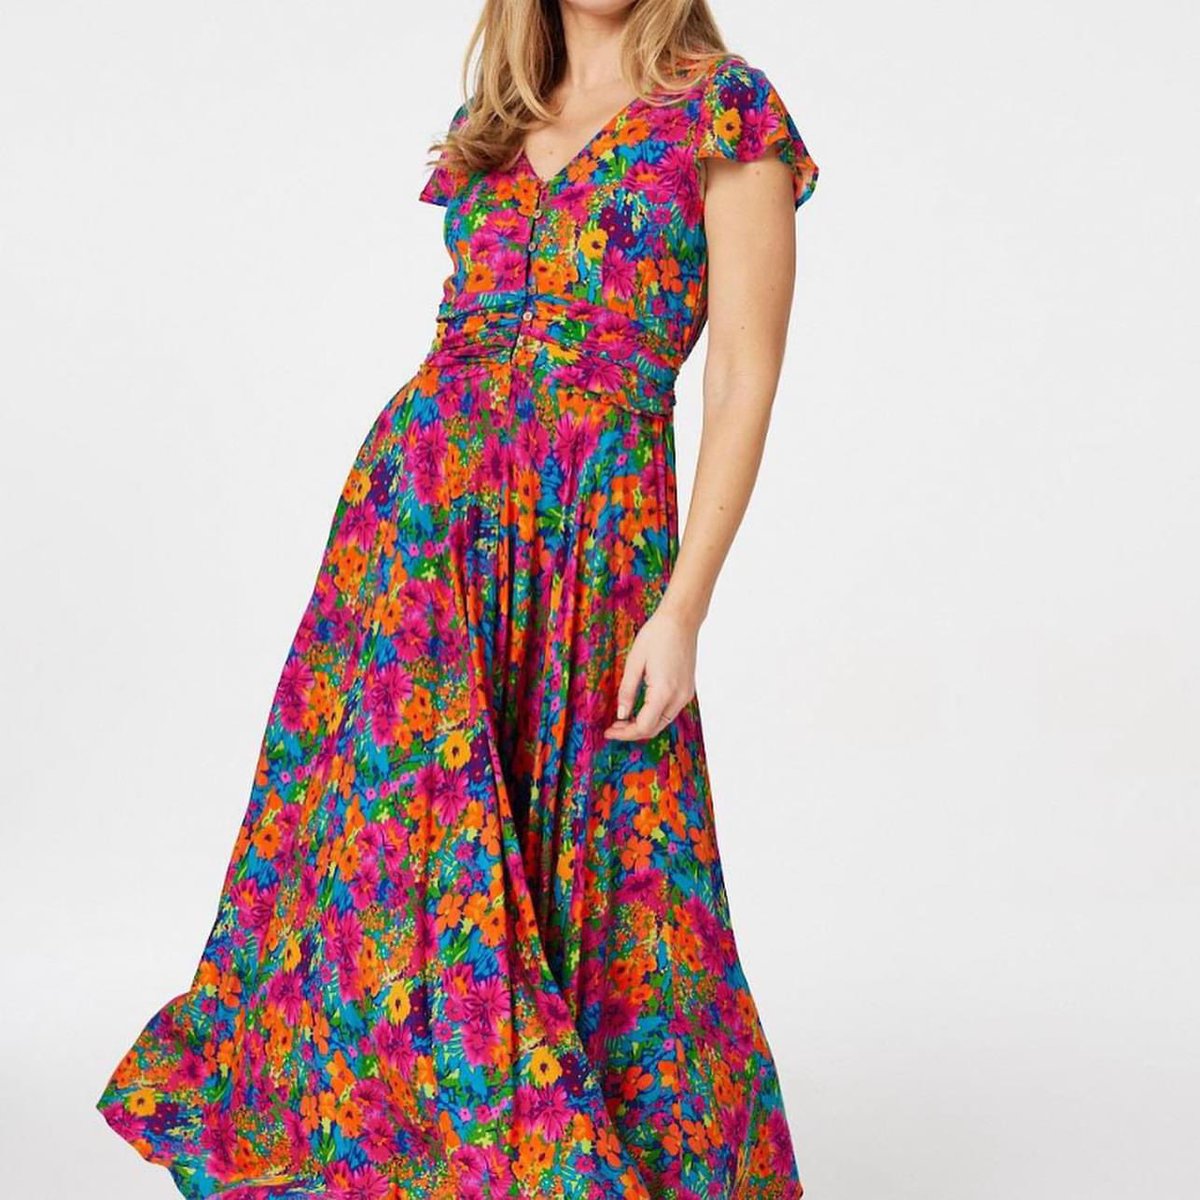 I was pleasantly surprised to see Lisa Faulkner looking great in our gorgeous tropical maxi. Sadly Lisa didn’t buy it from us but still … #colour #maxidress #tropical #swishydress #sunshine #print #dresses #fitandflare #claygate #surreylife #ageless #timeless #islandlife